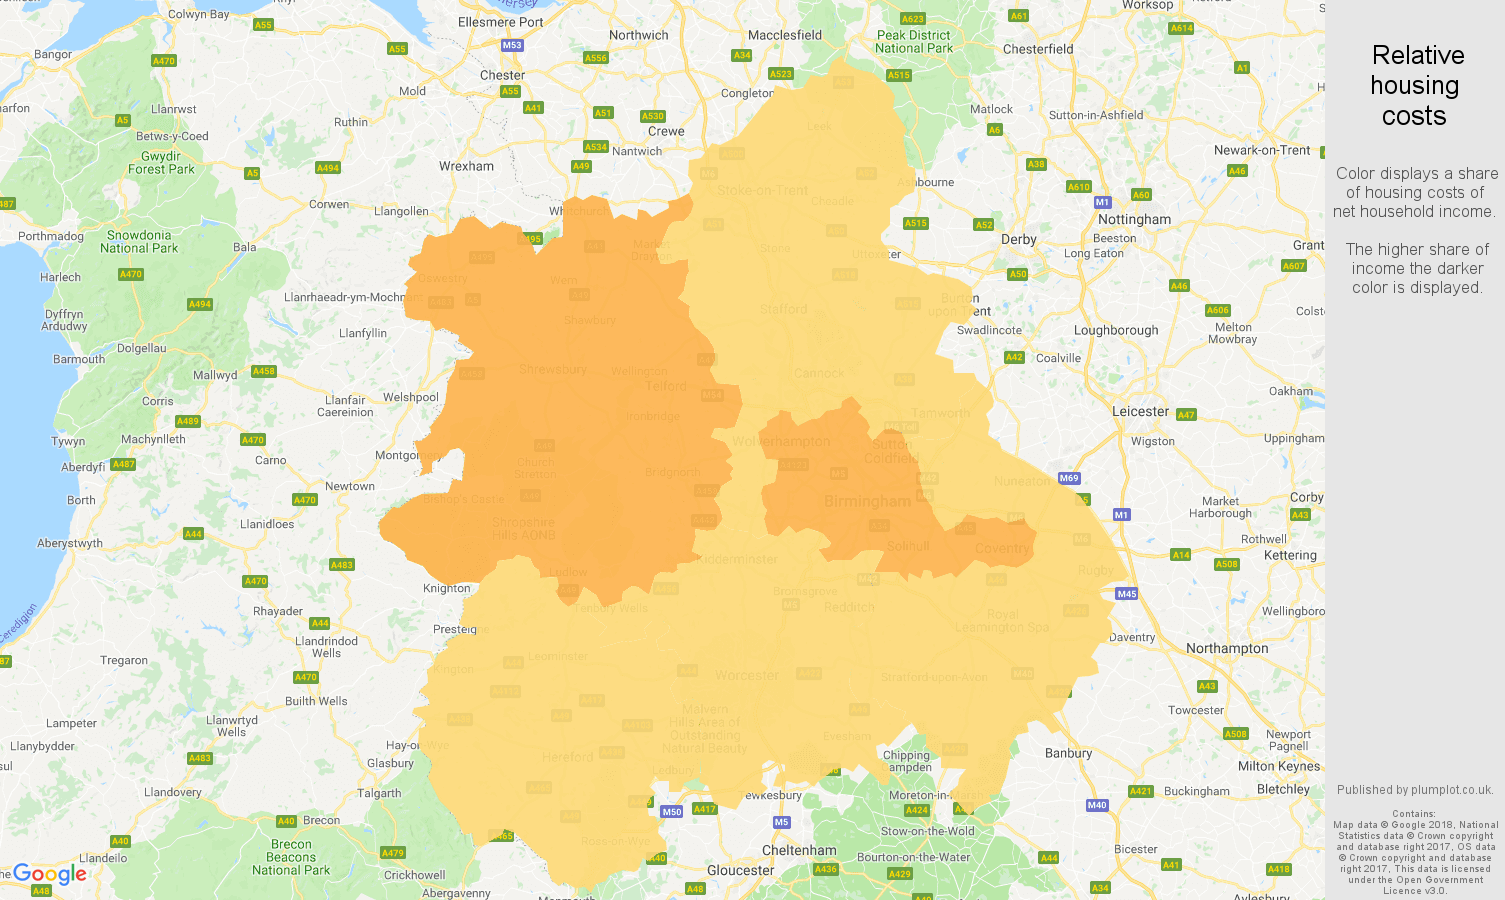 West Midlands relative housing costs map